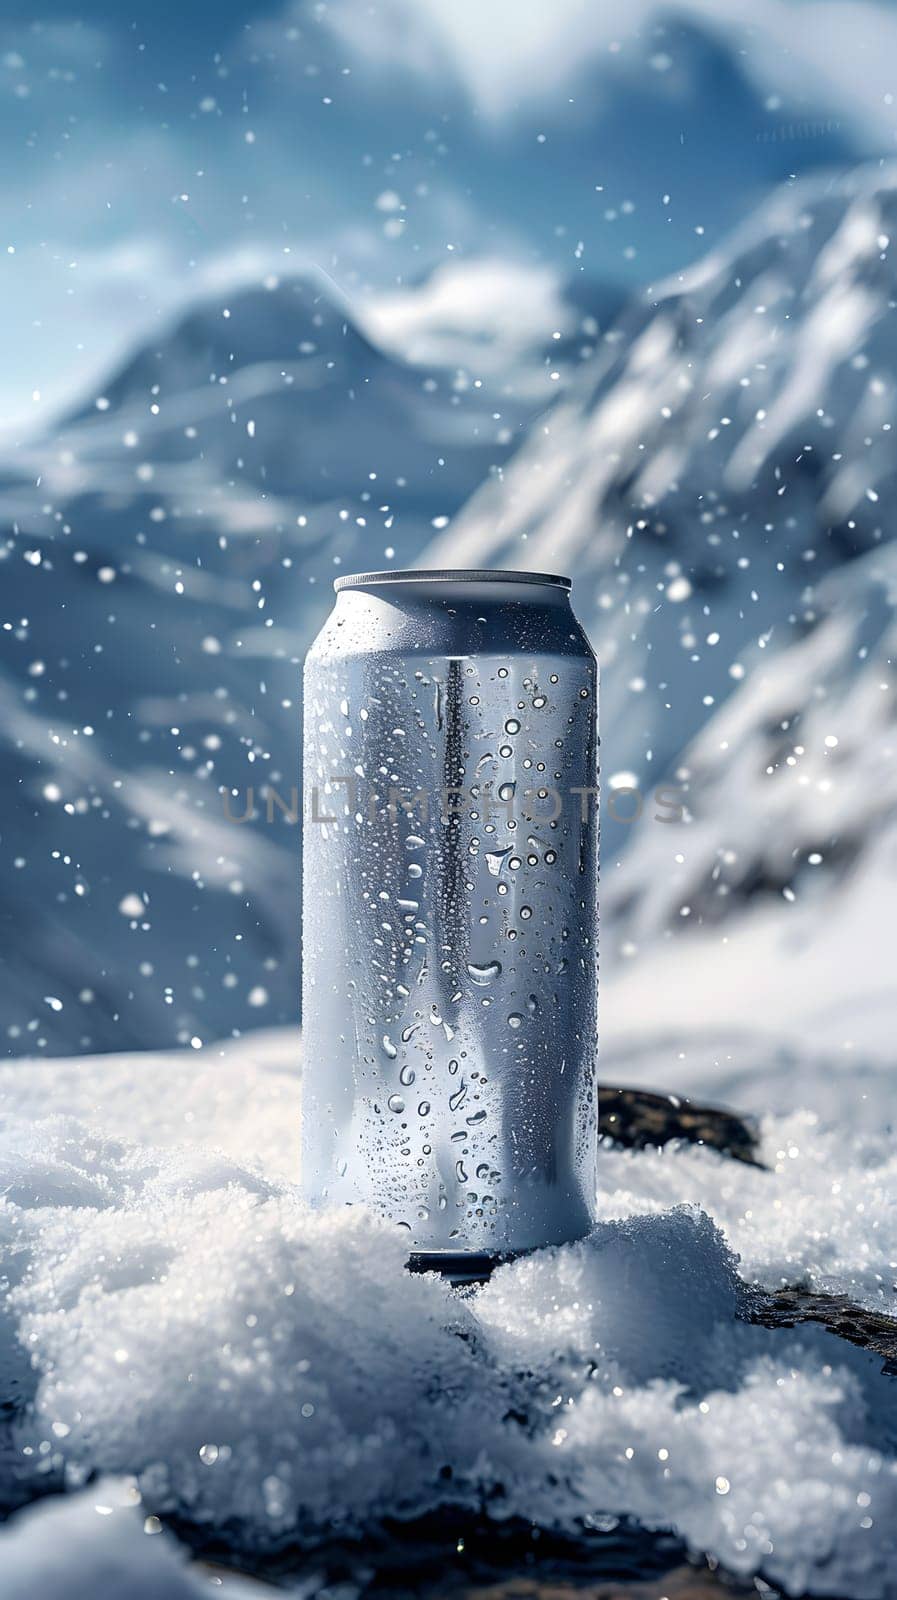 A can of soda is placed in the snow on a mountain slope, surrounded by a serene natural landscape with a clear sky and views of the Arctic ocean